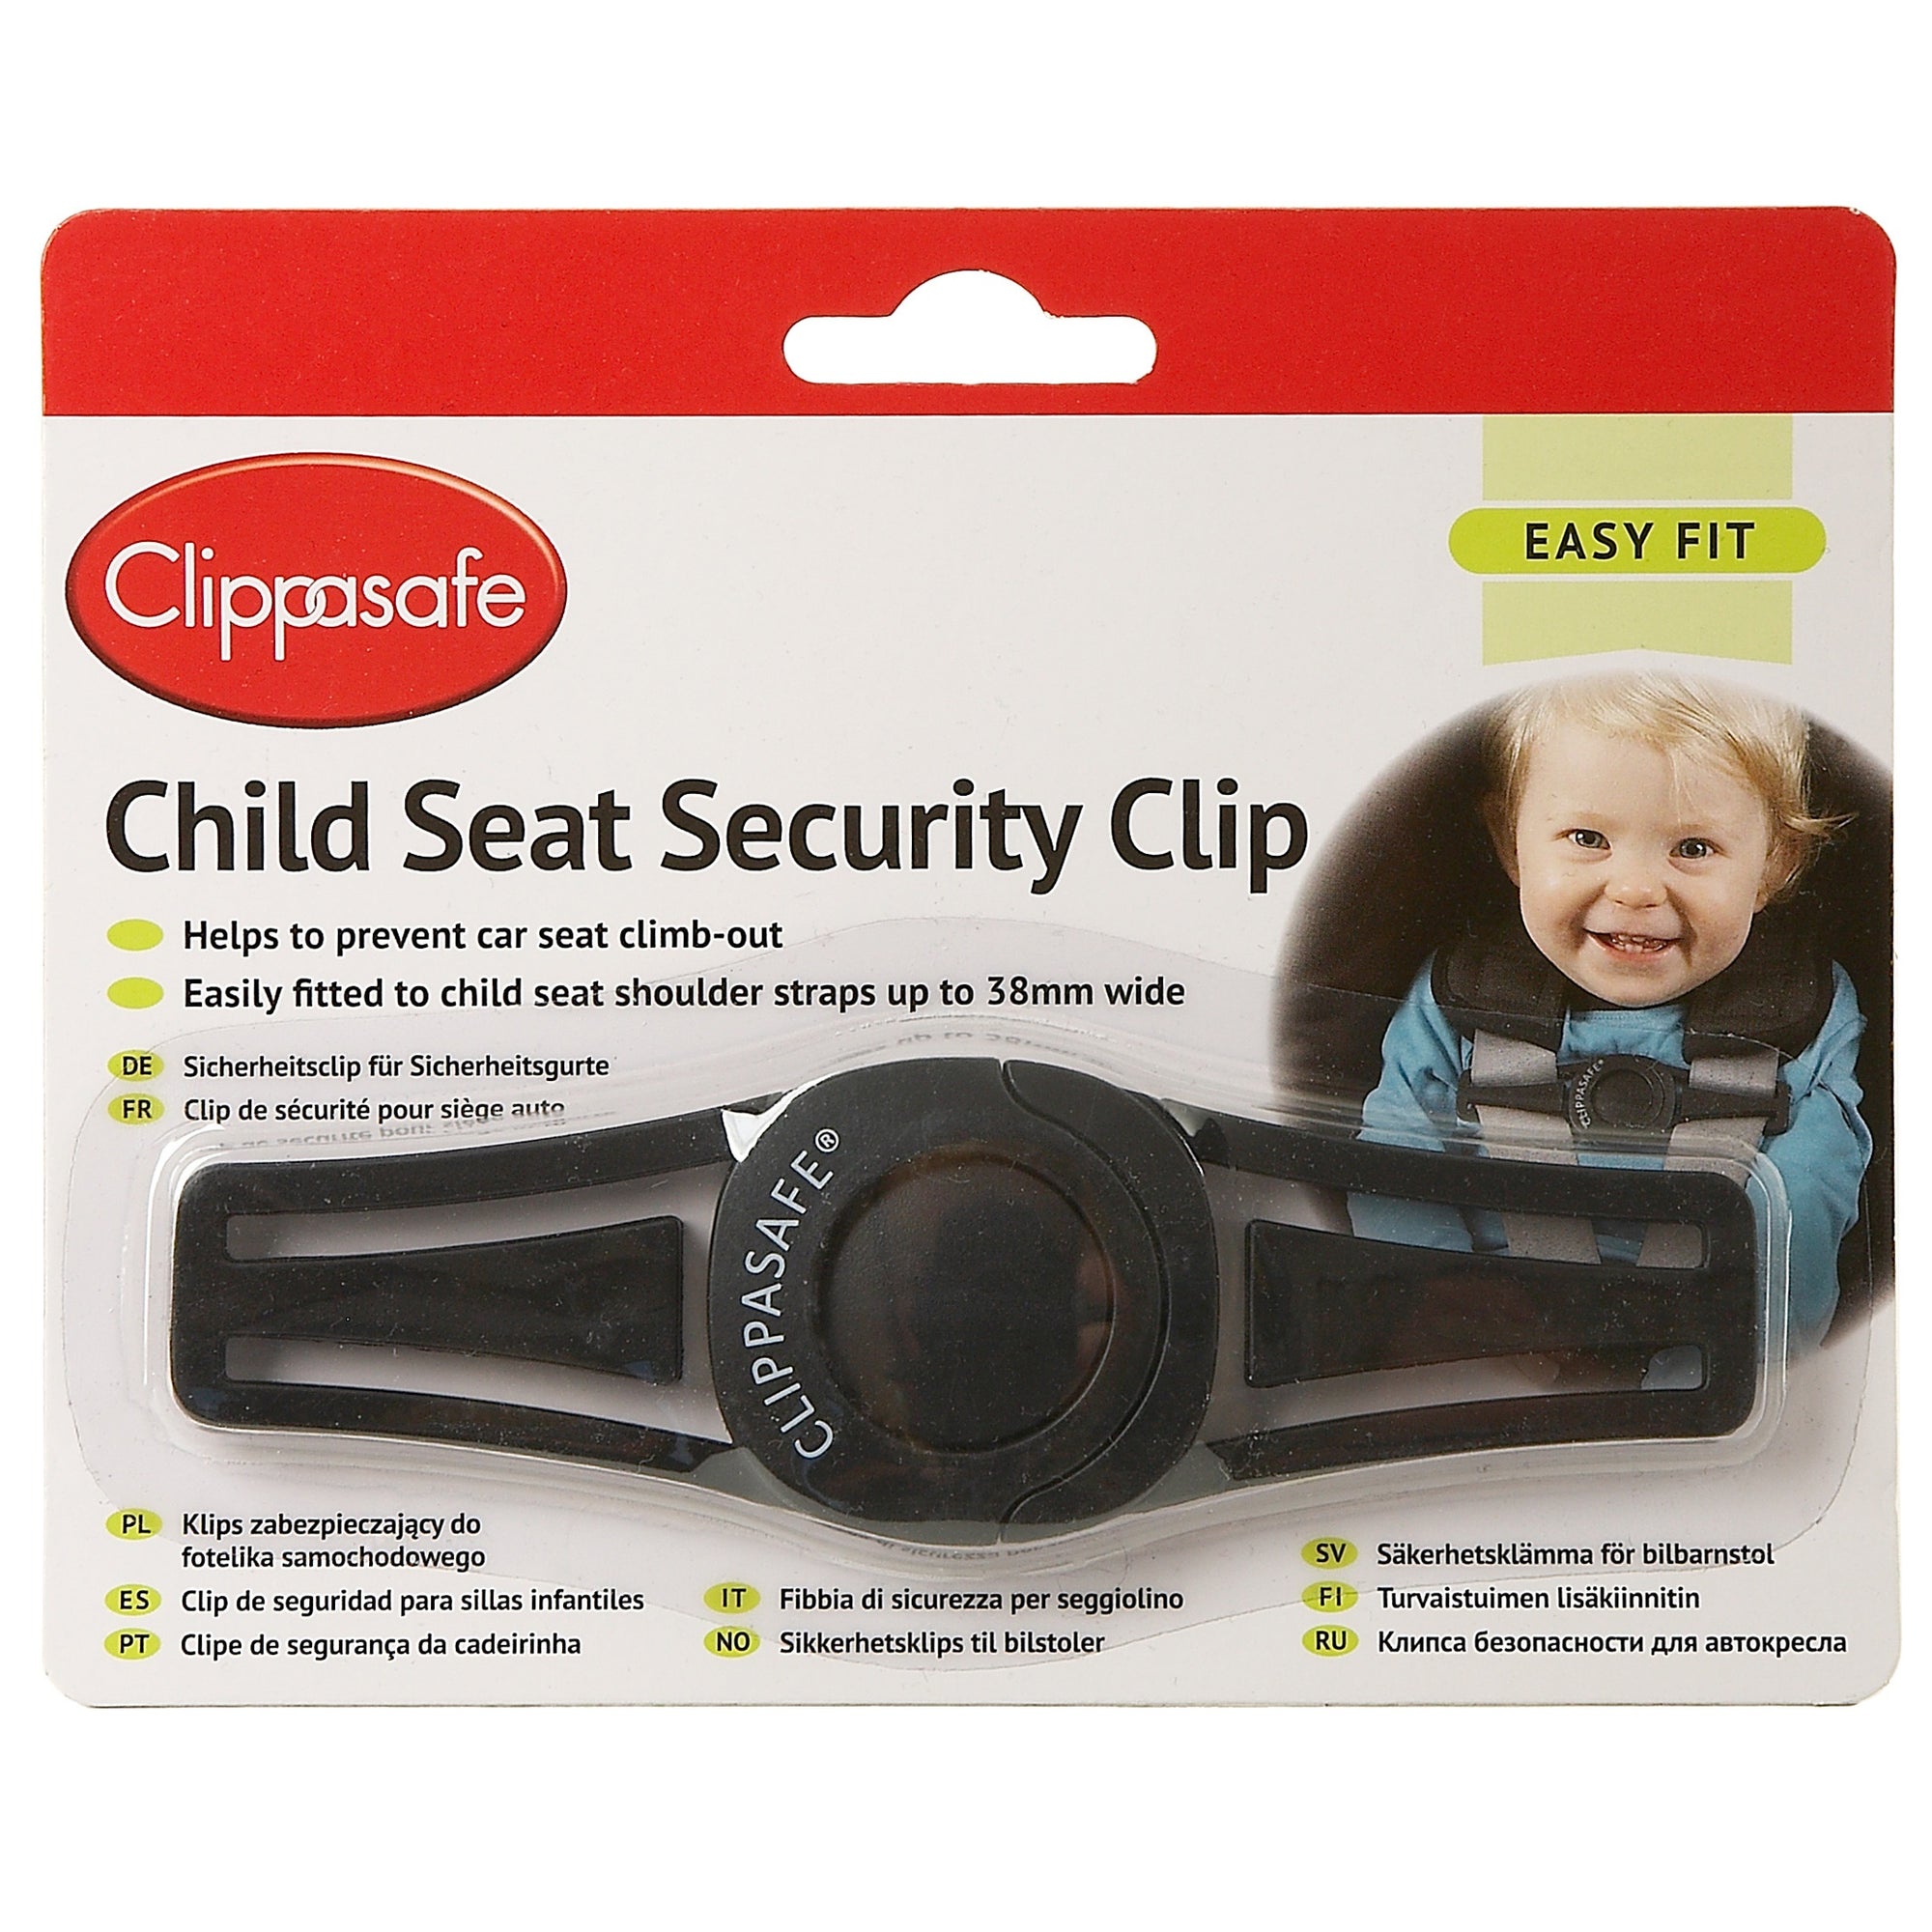 Clippasafe 64 Child Seat Security Cliop